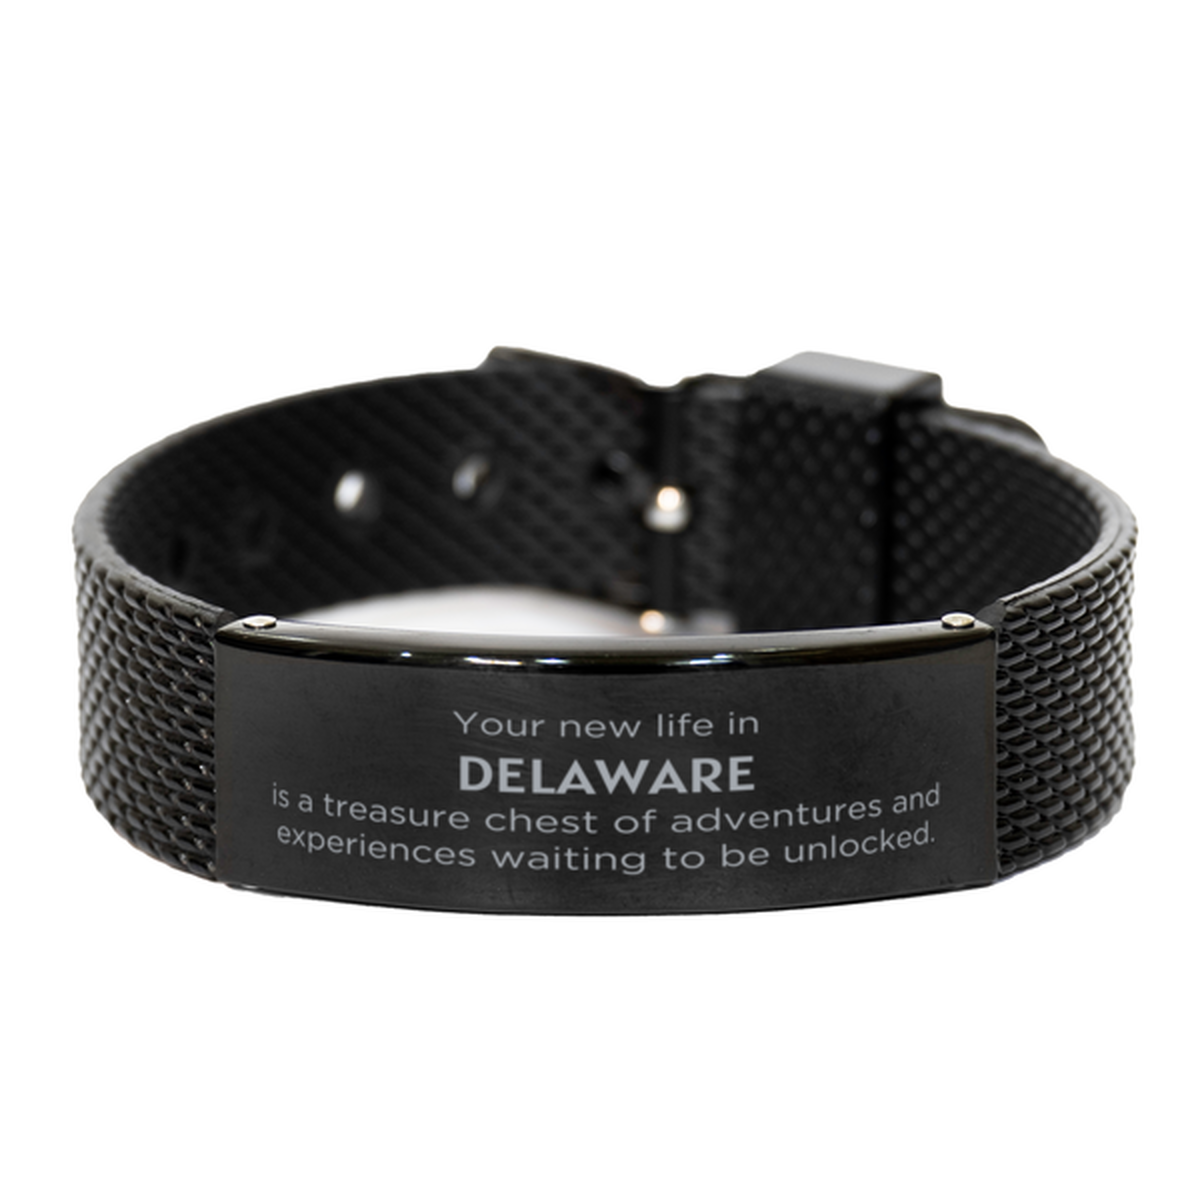 Moving to Delaware Gifts, Your new life in Delaware, Long Distance Delaware Christmas Black Shark Mesh Bracelet For Men, Women, Friends, Coworkers